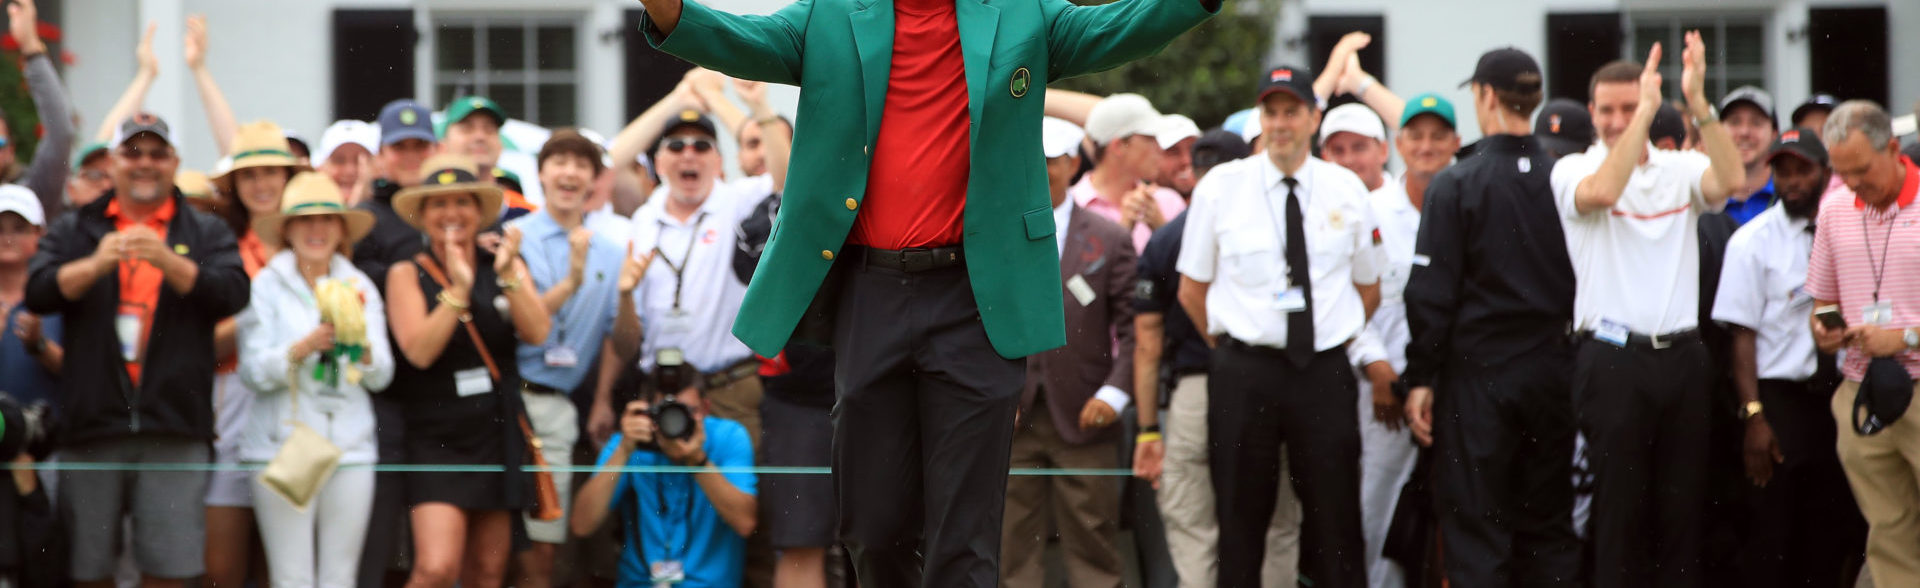 Tiger Woods waves to fans at the Masters.